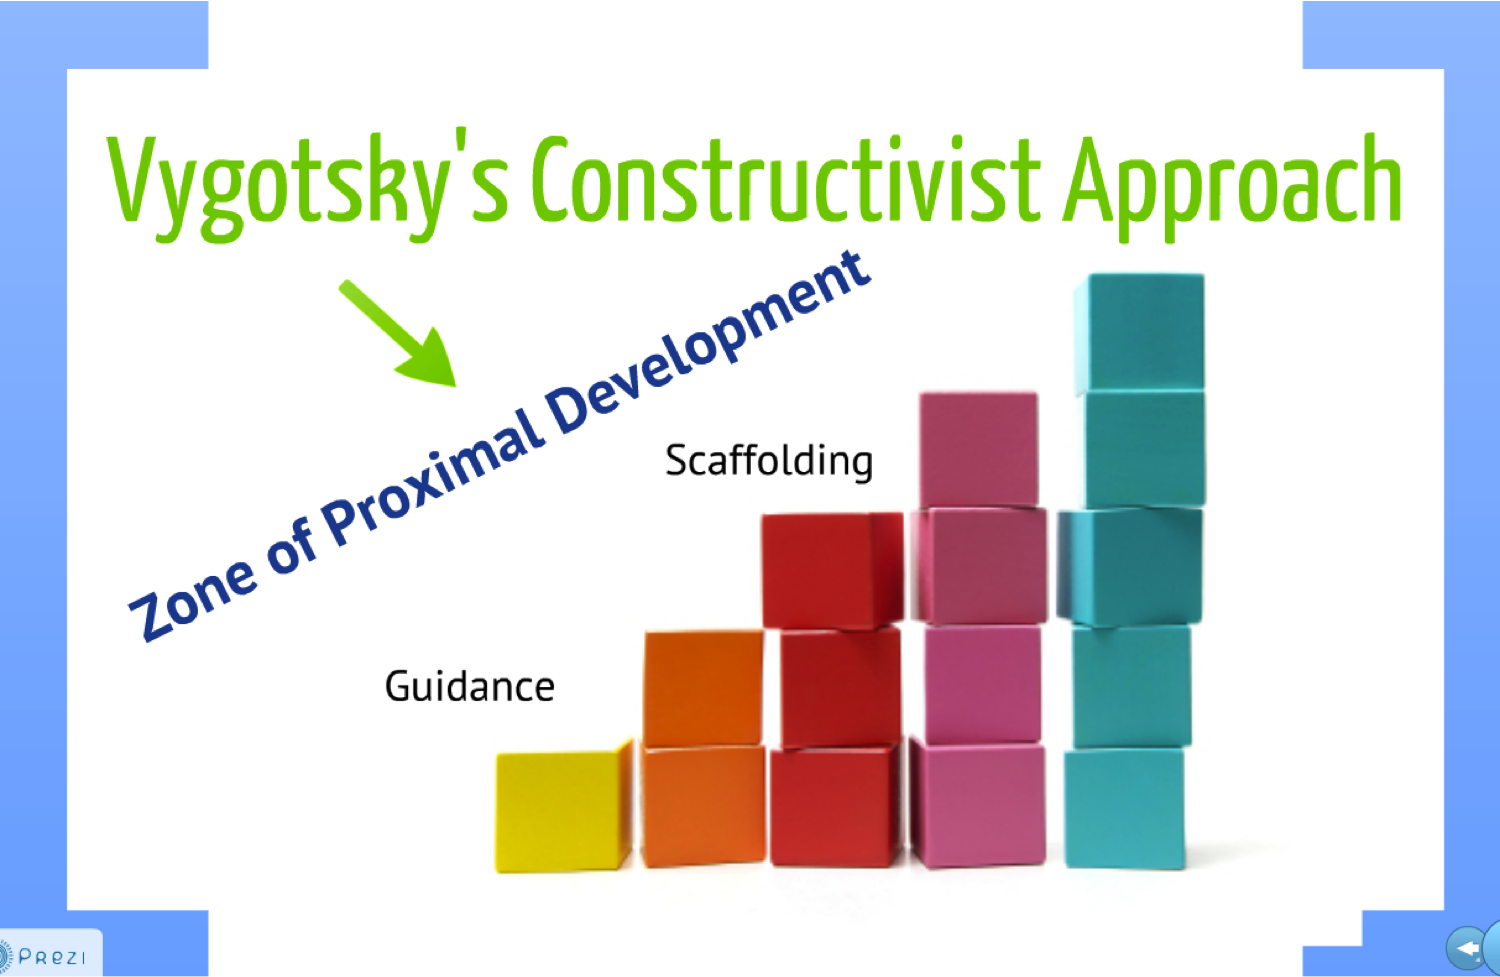 How can you understand Vygotsky's zone of proximal development?